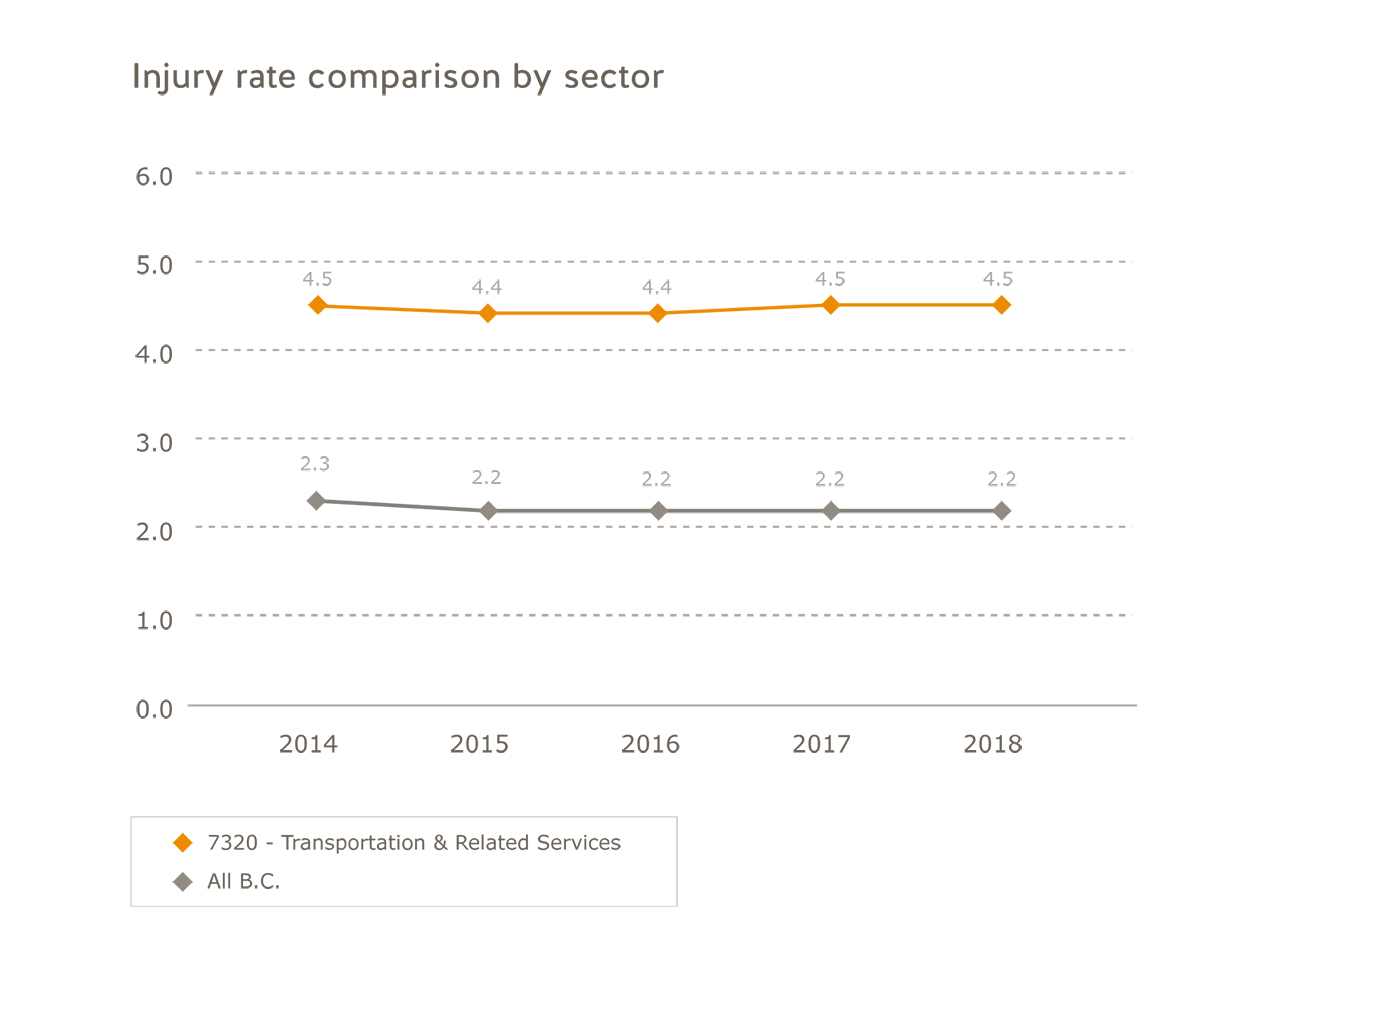 Transportation injury rate comparison by sector for 2014 to 2018. Transportation: 2014=4.5; 2015=4.4; 2016=4.4; 2017=4.5; 2018=4.5. All B.C.: 2014=2.3; 2015=2.2; 2016=2.2; 2017=2.2; 2018=2.2